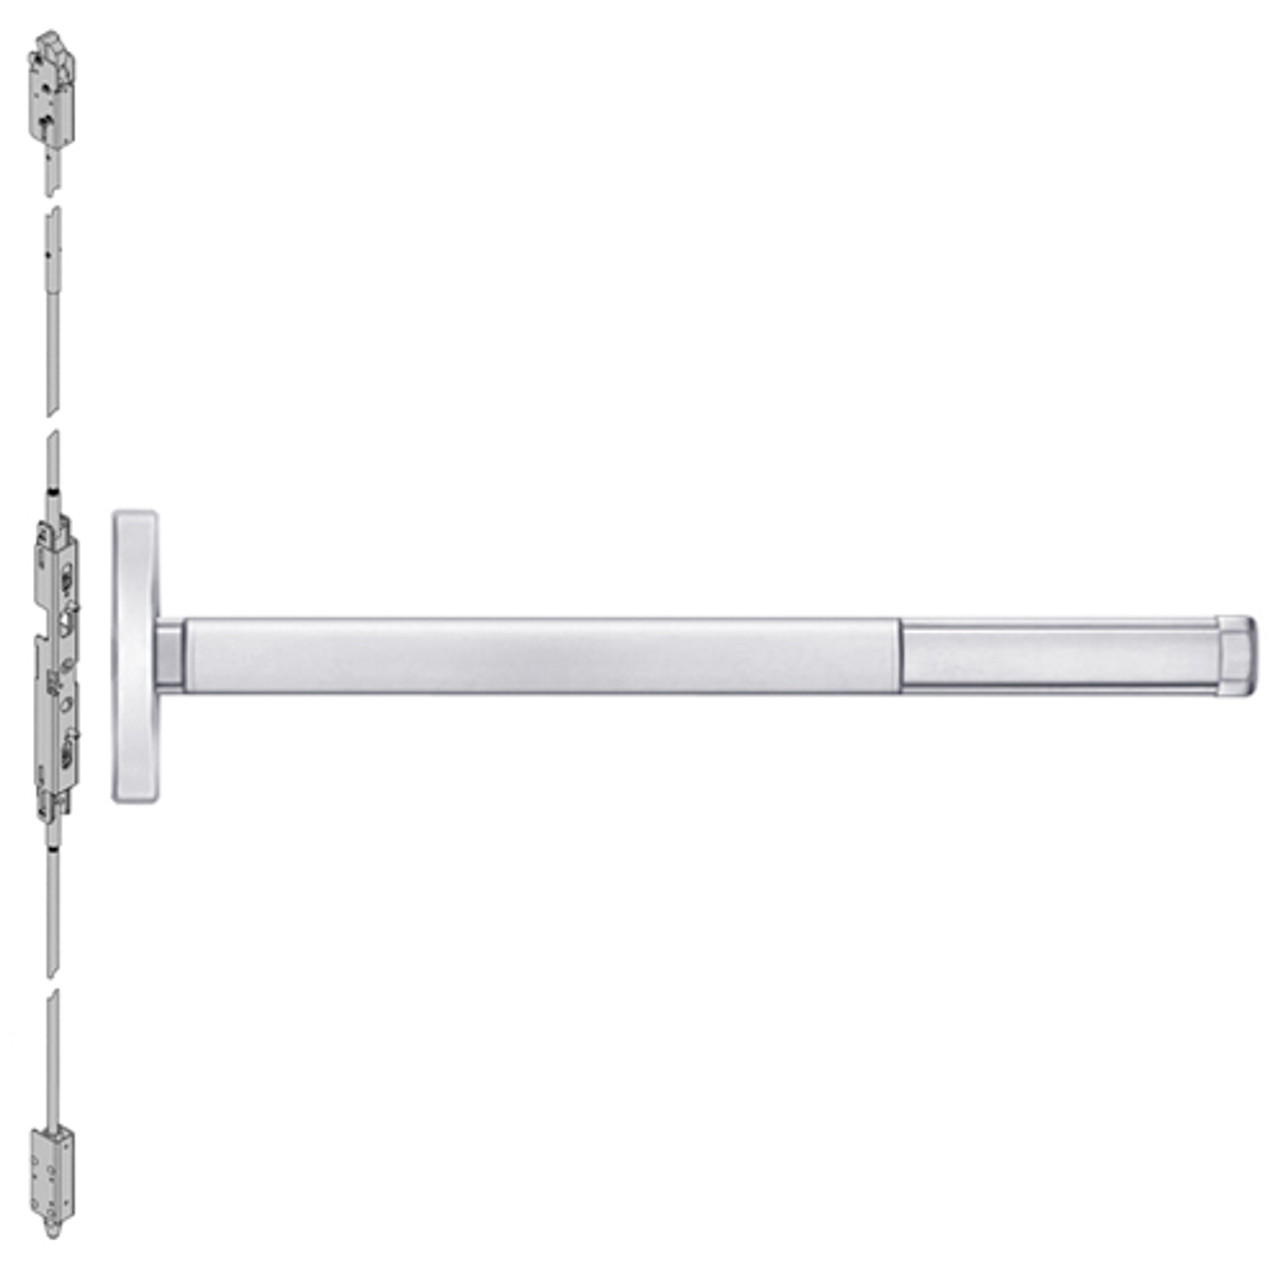 DE2602LBR-625-48 PHI 2600 Series Concealed Vertical Rod Exit Device with Delayed Egress Prepped for Dummy Trim in Bright Chrome Finish